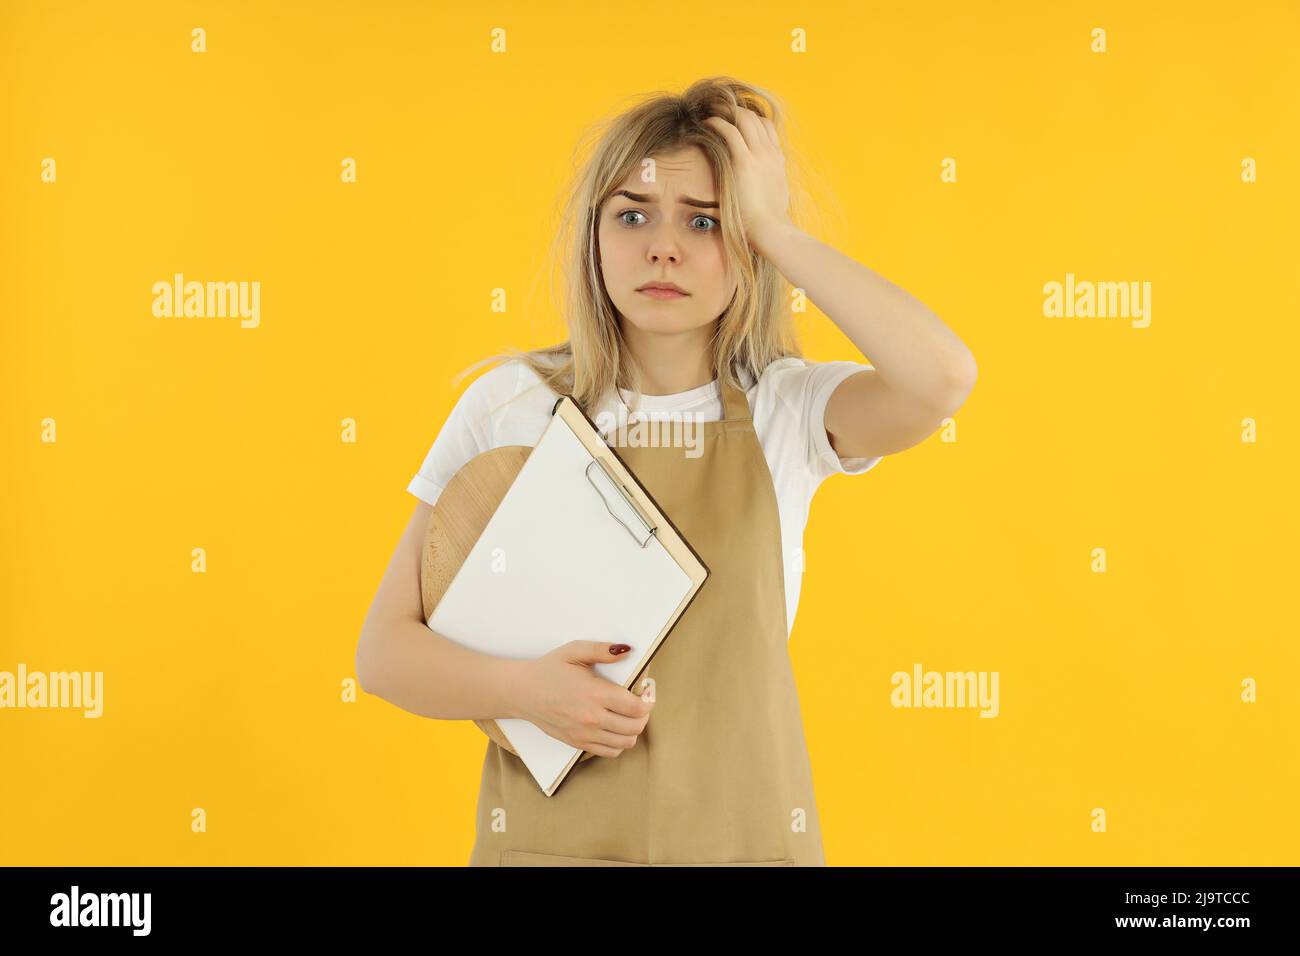 Concept of occupation, young female waiter on yellow background Stock Photo